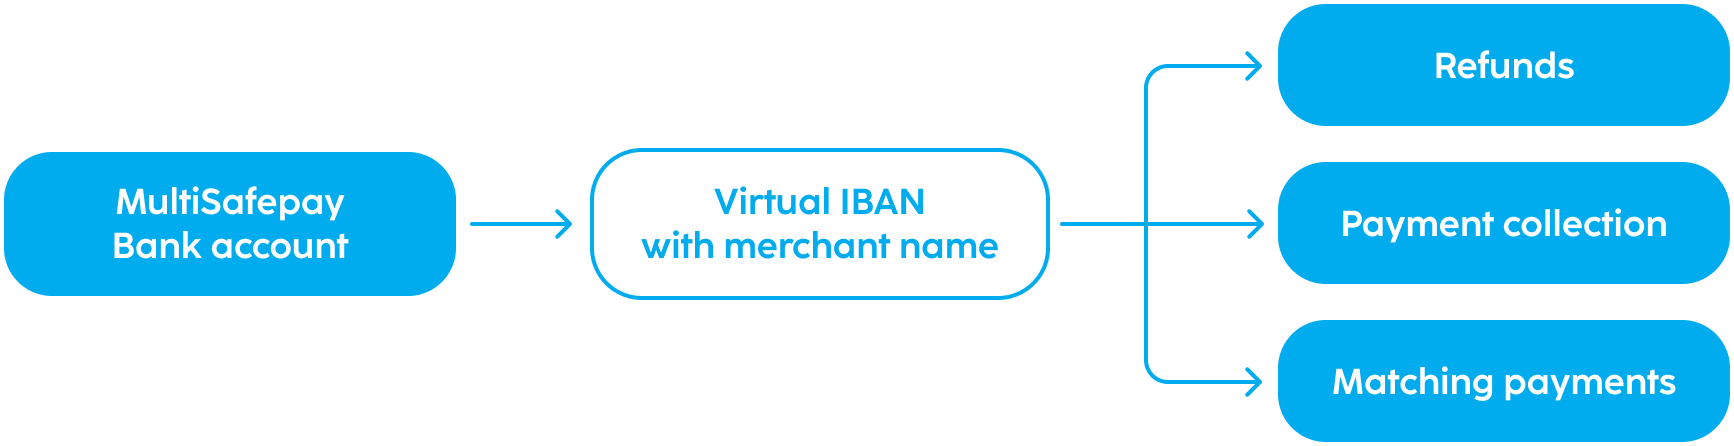 A diagram showing how MultiSafepay uses a virtual IBAN to create a bank account that is displayed to the consumer